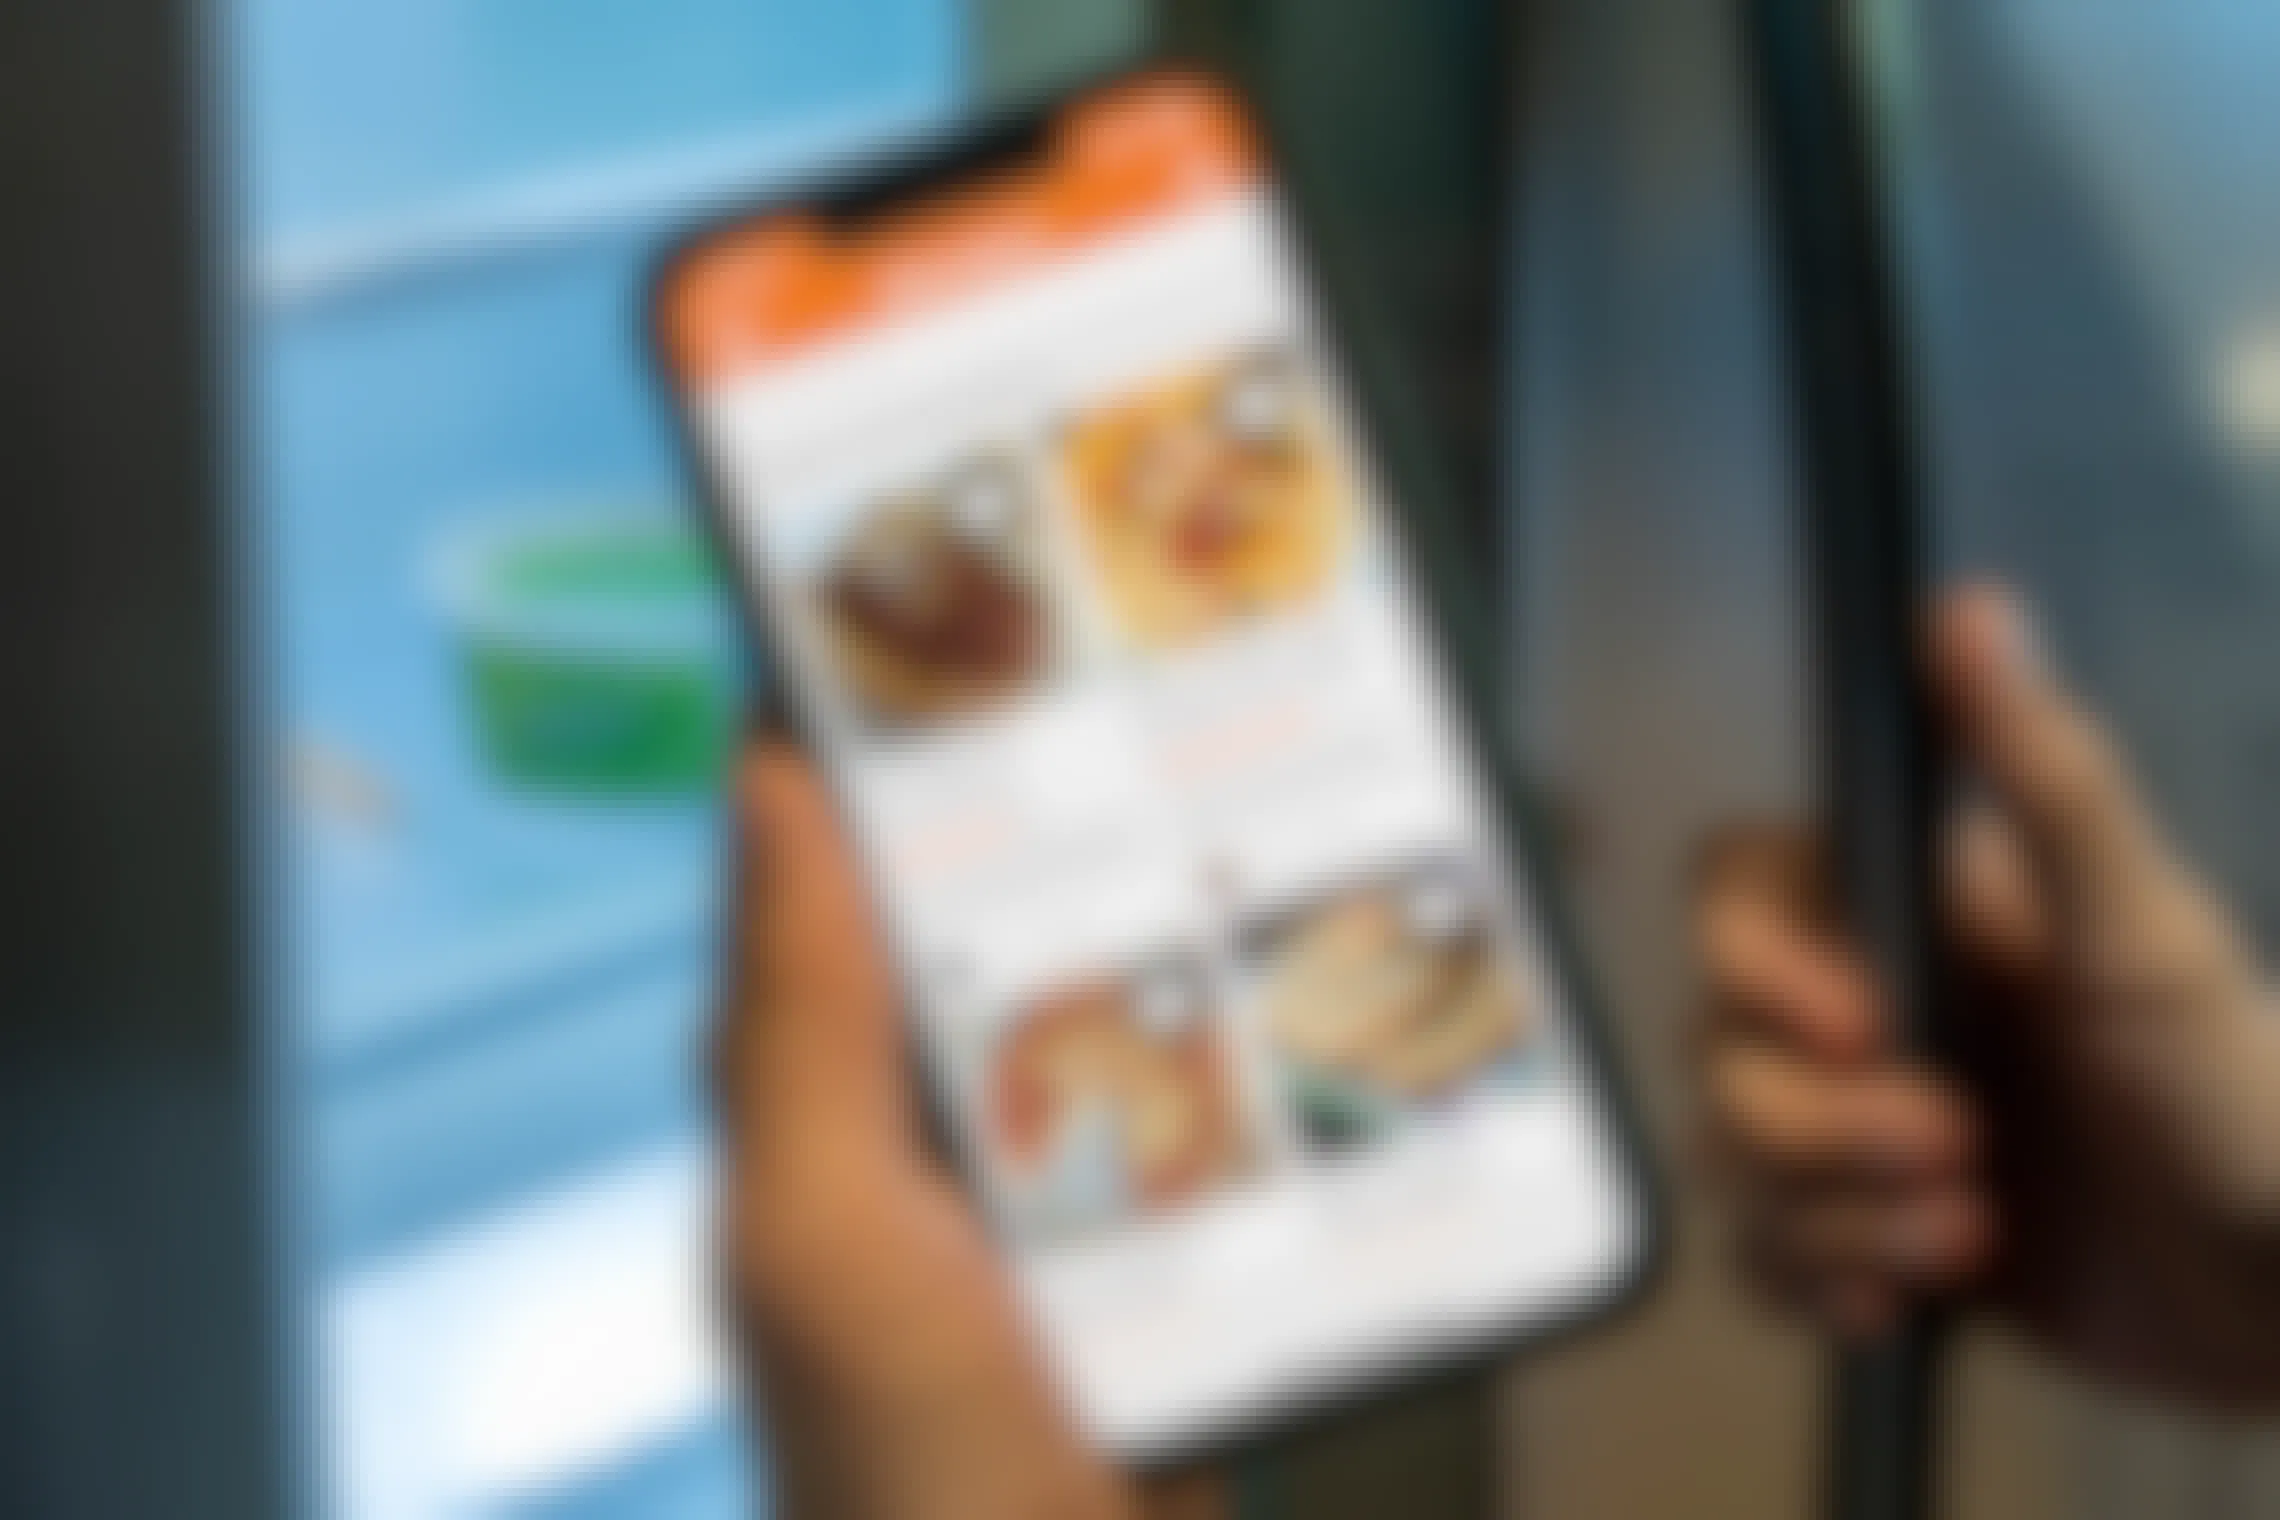 Allrecipes app on a cell phone held in front of a partly open refrigerator